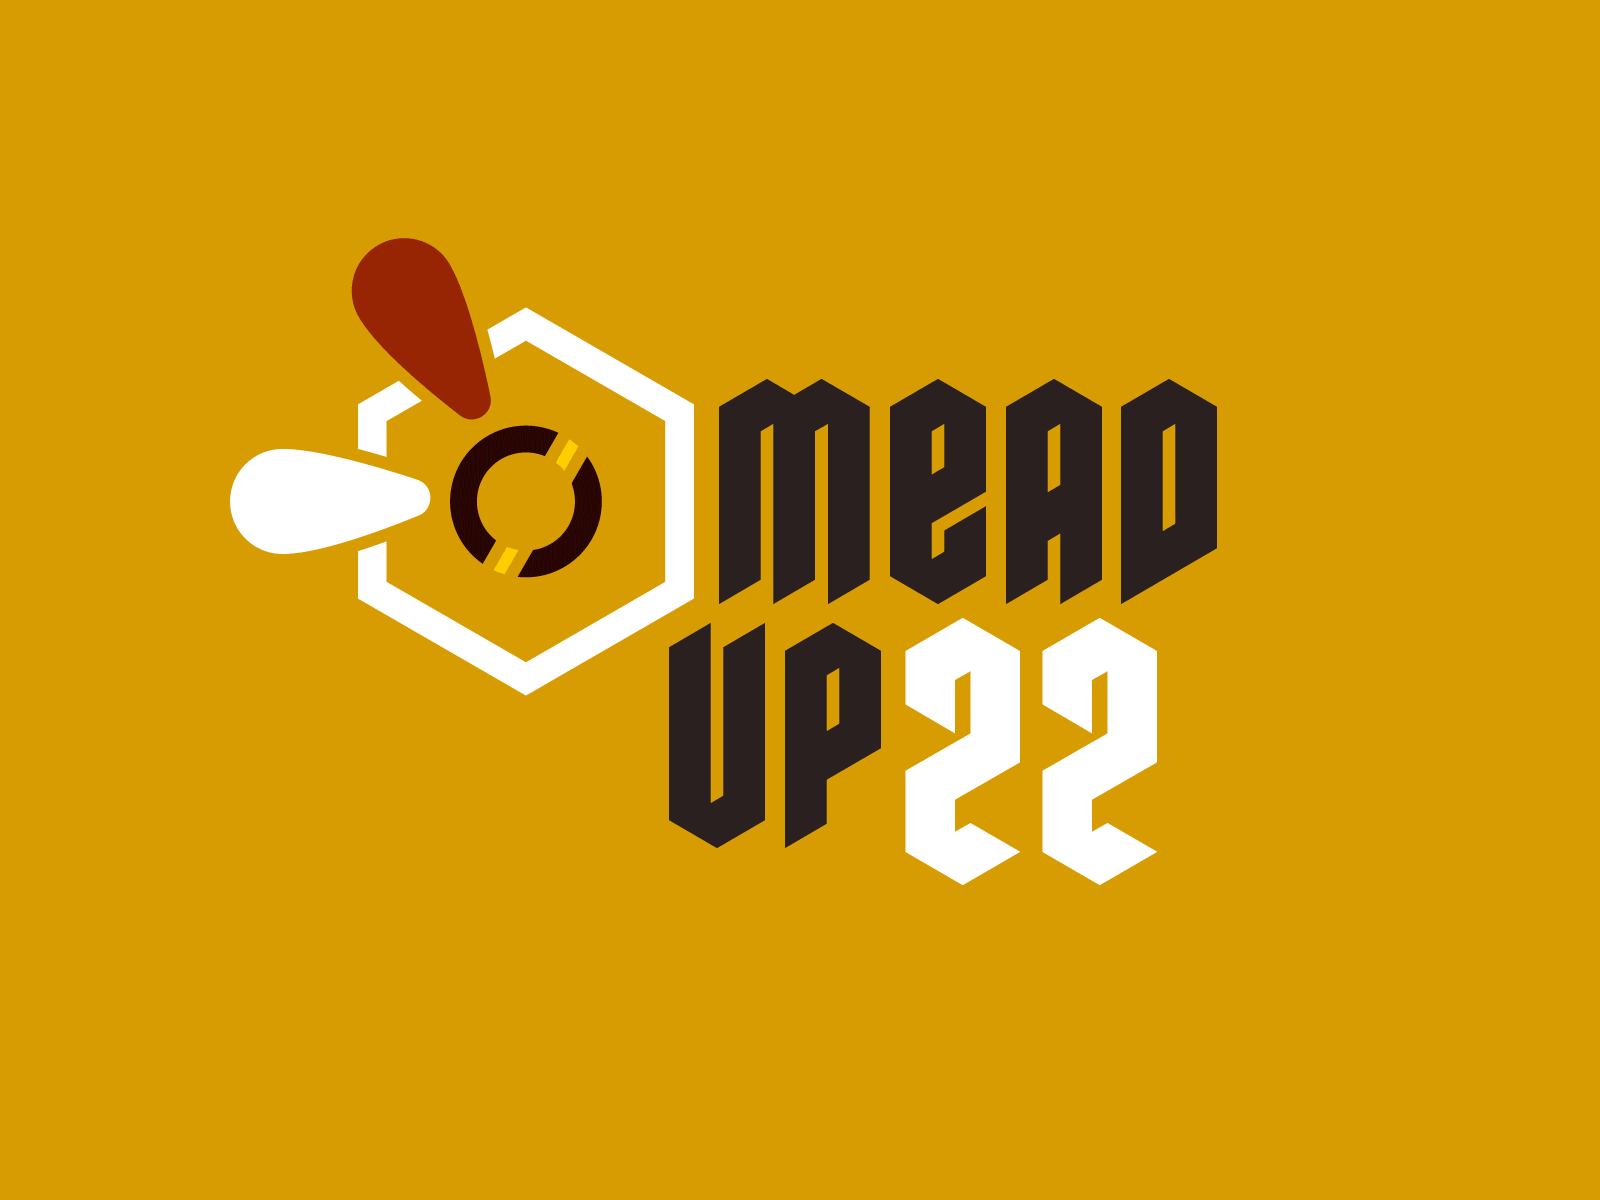 Online Mead Up animated gif design logo